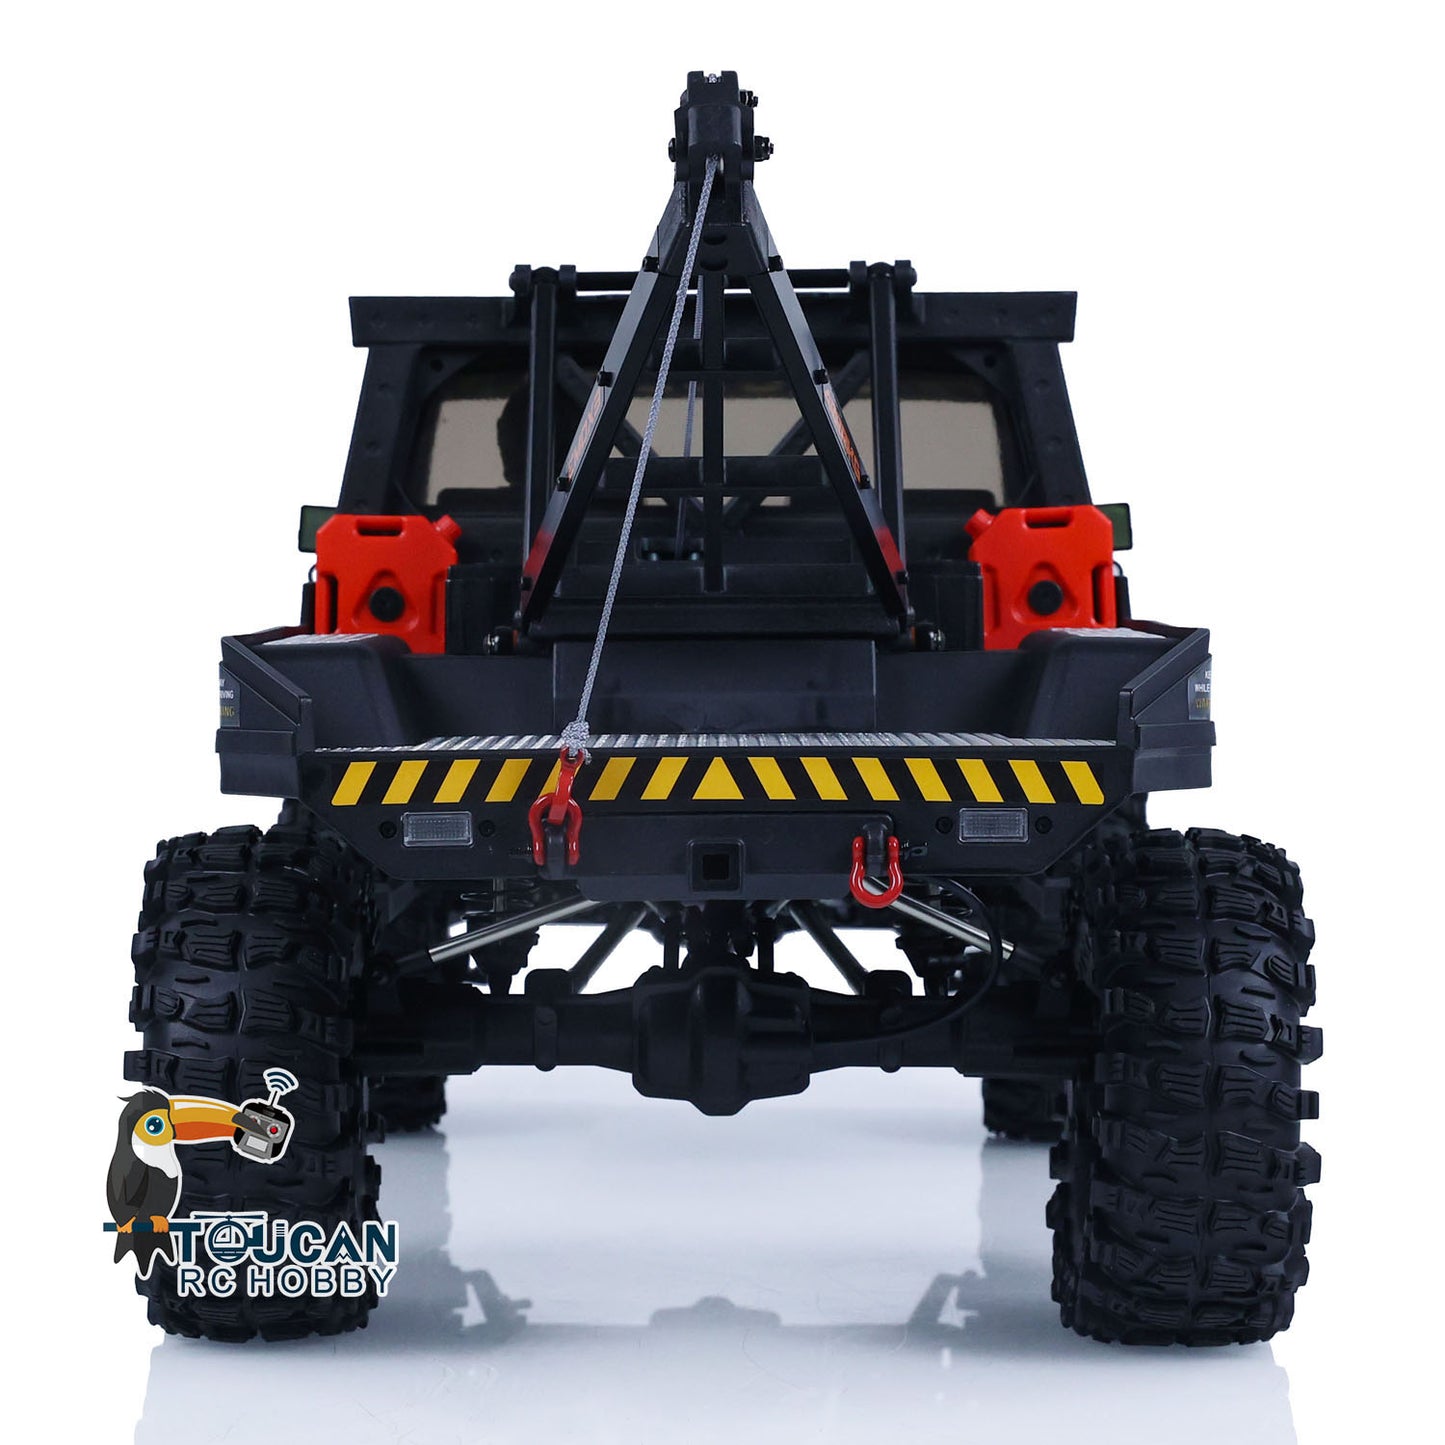 CORSSRC 4WD 1/8 EMO X3 RC Road Rescue Towing Crawler PNP